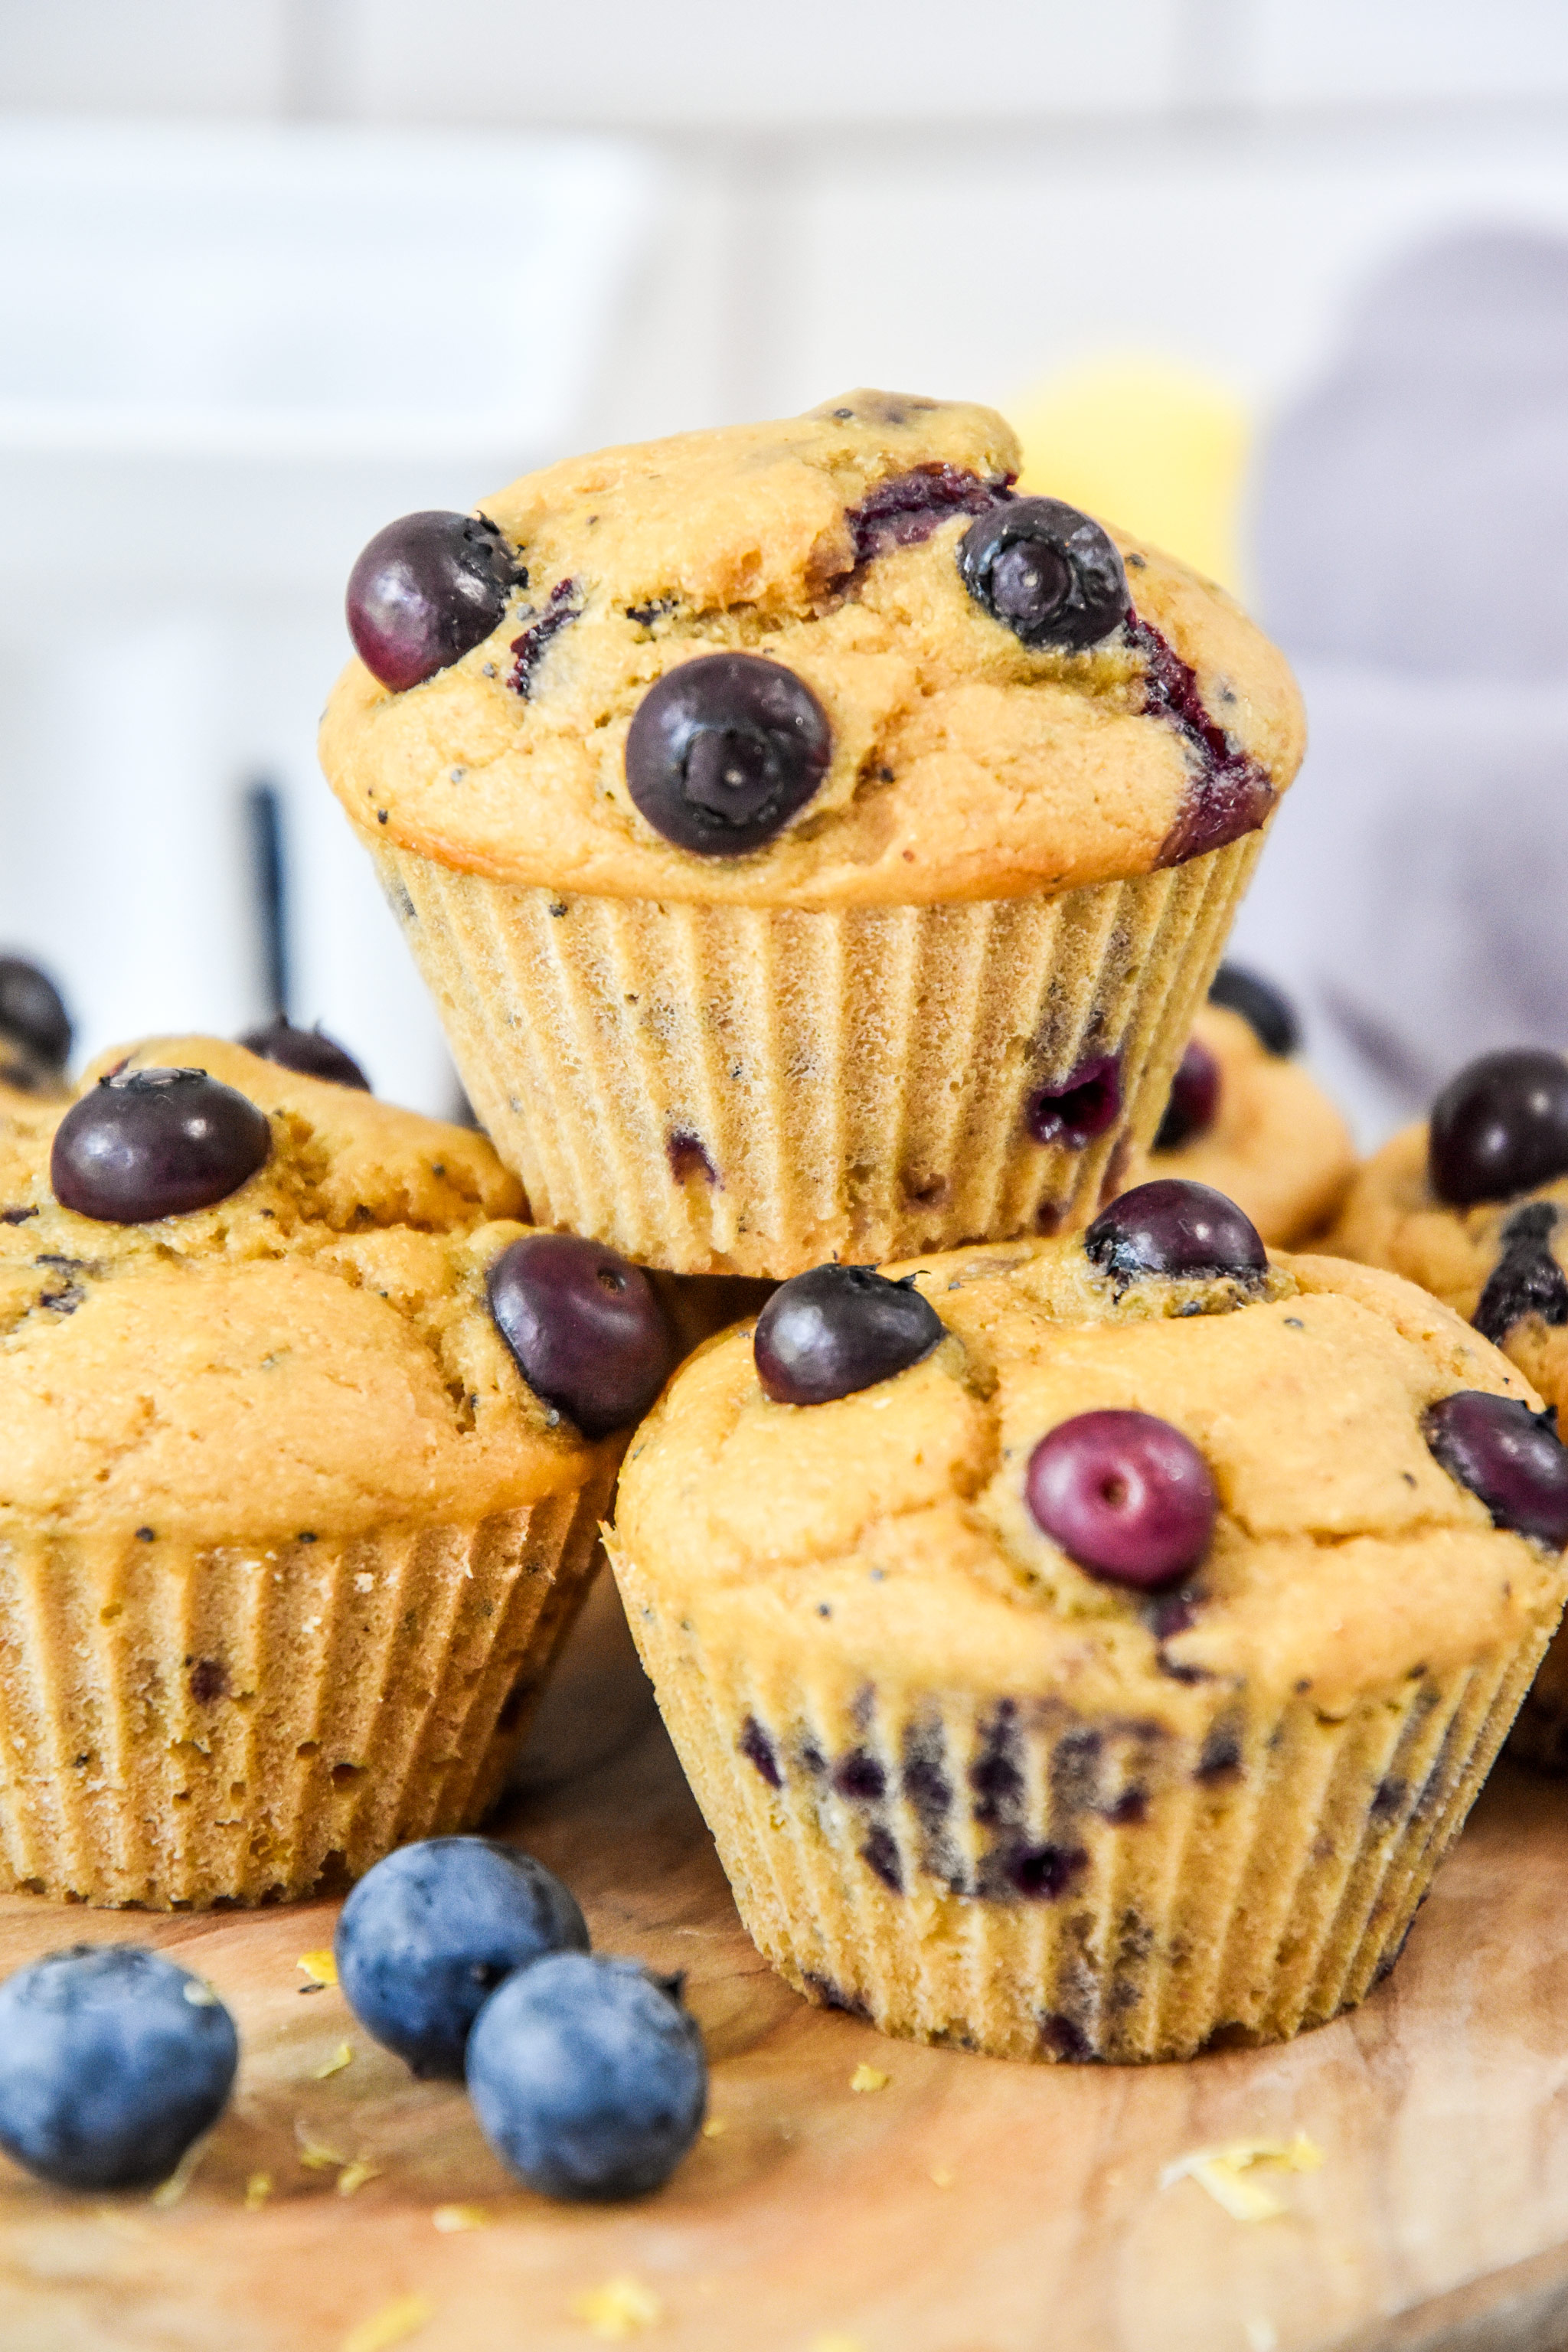 muffins stacked on a cutting board with blueberries.